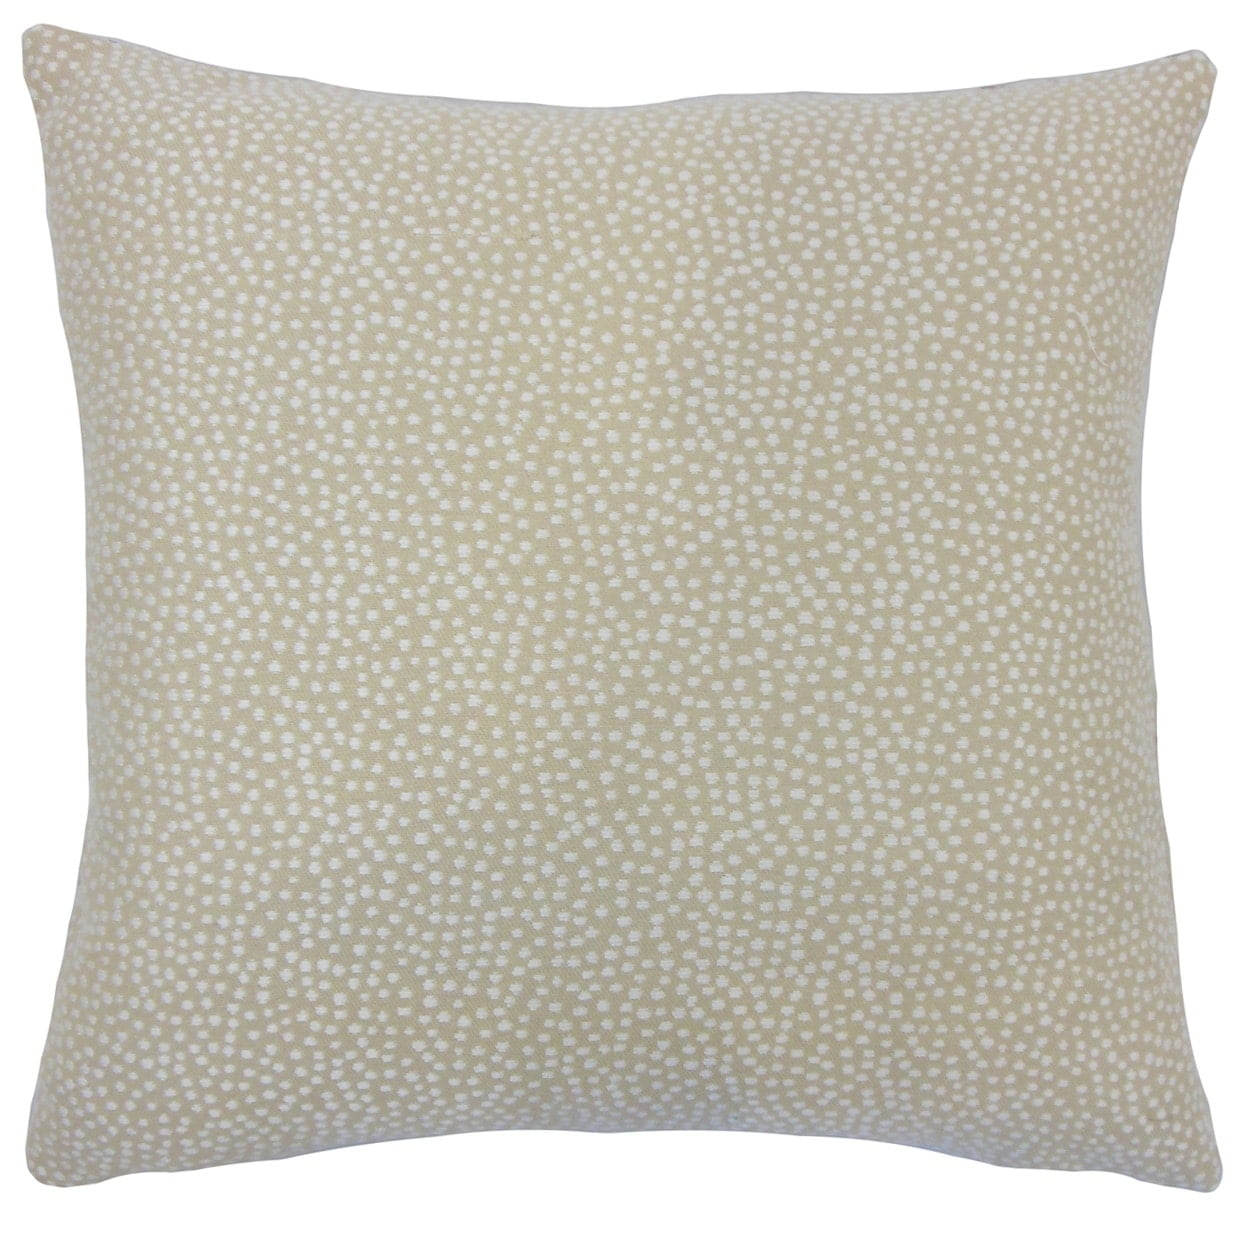 Home & Kitchen Toys & Hobbies The Pillow Collection Latiece Ikat ...